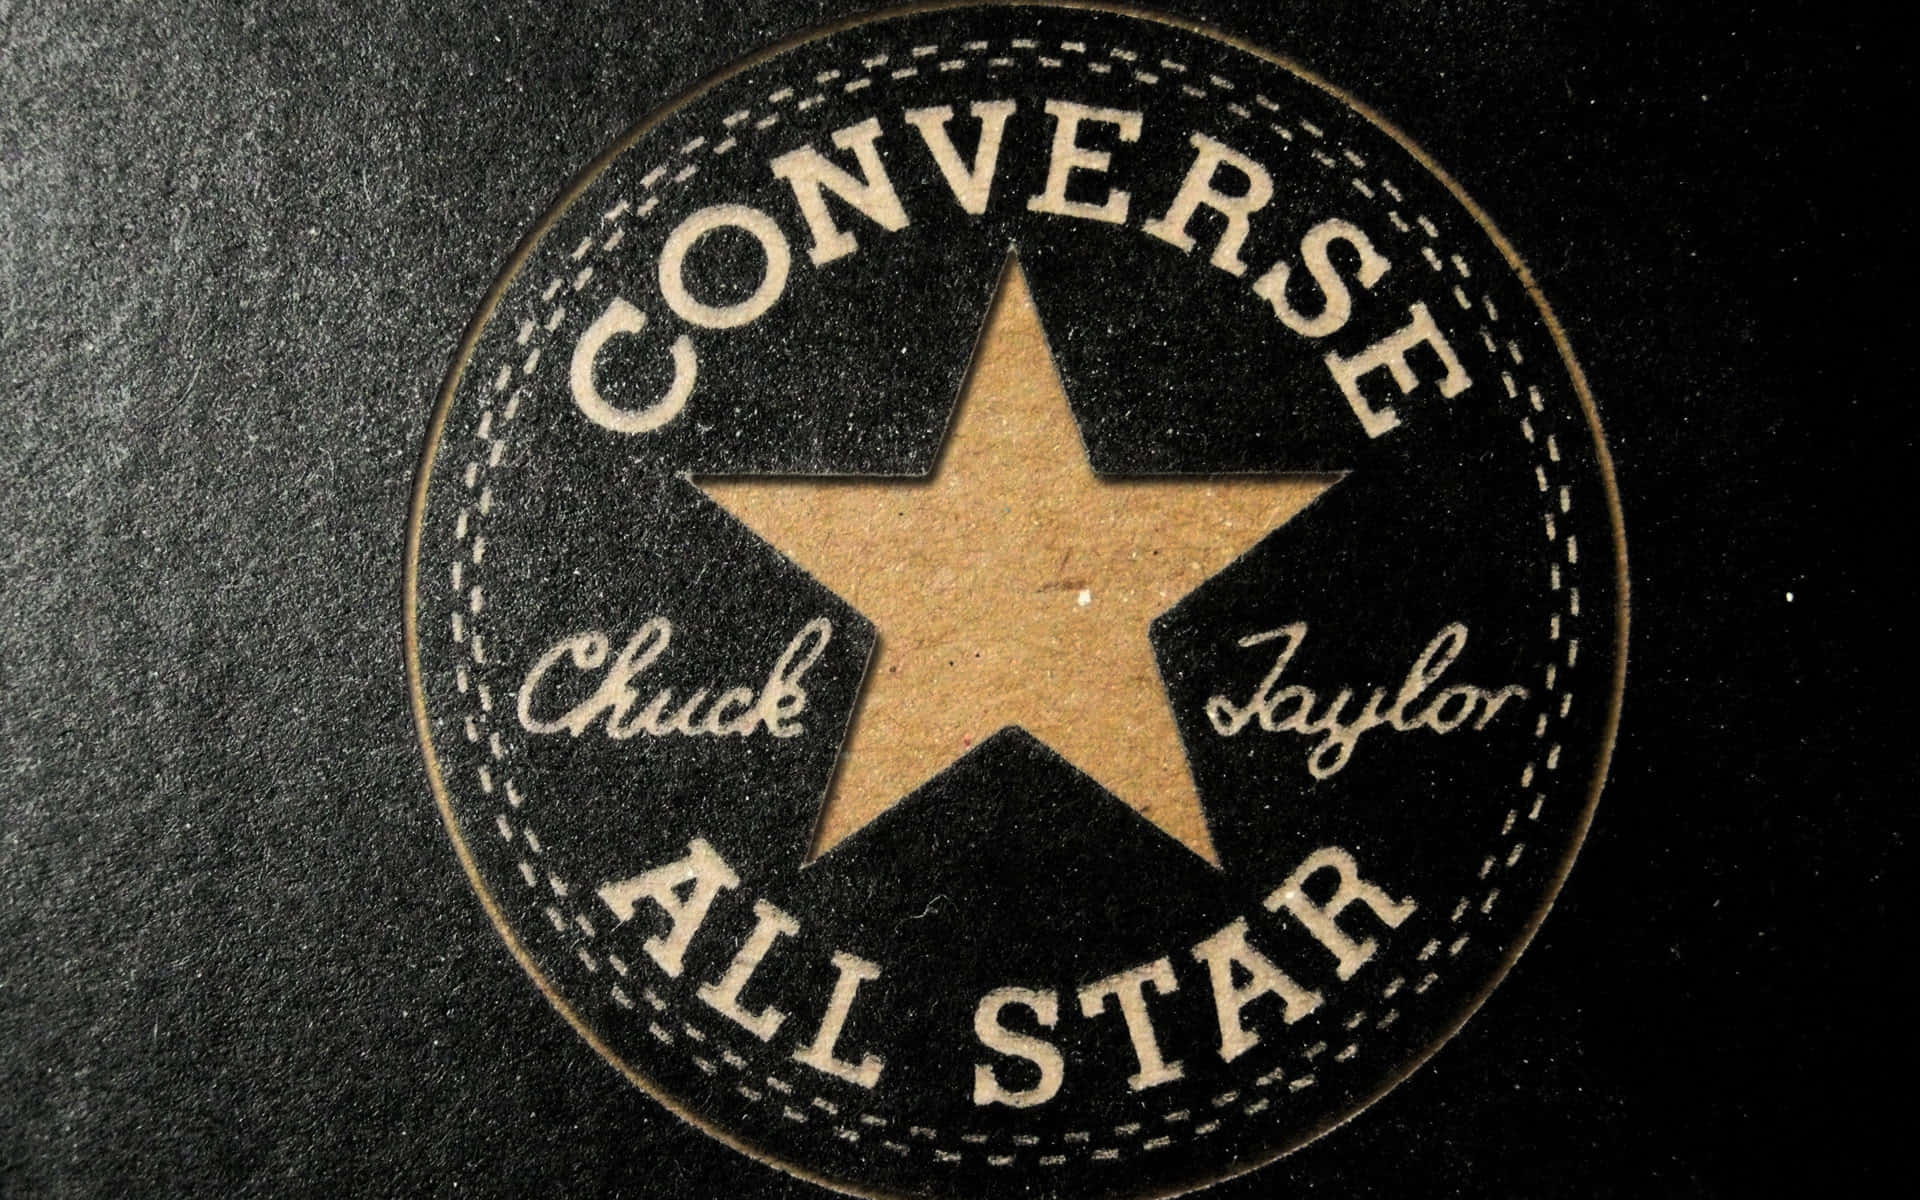 Image  Logo of the iconic American footwear brand, Converse